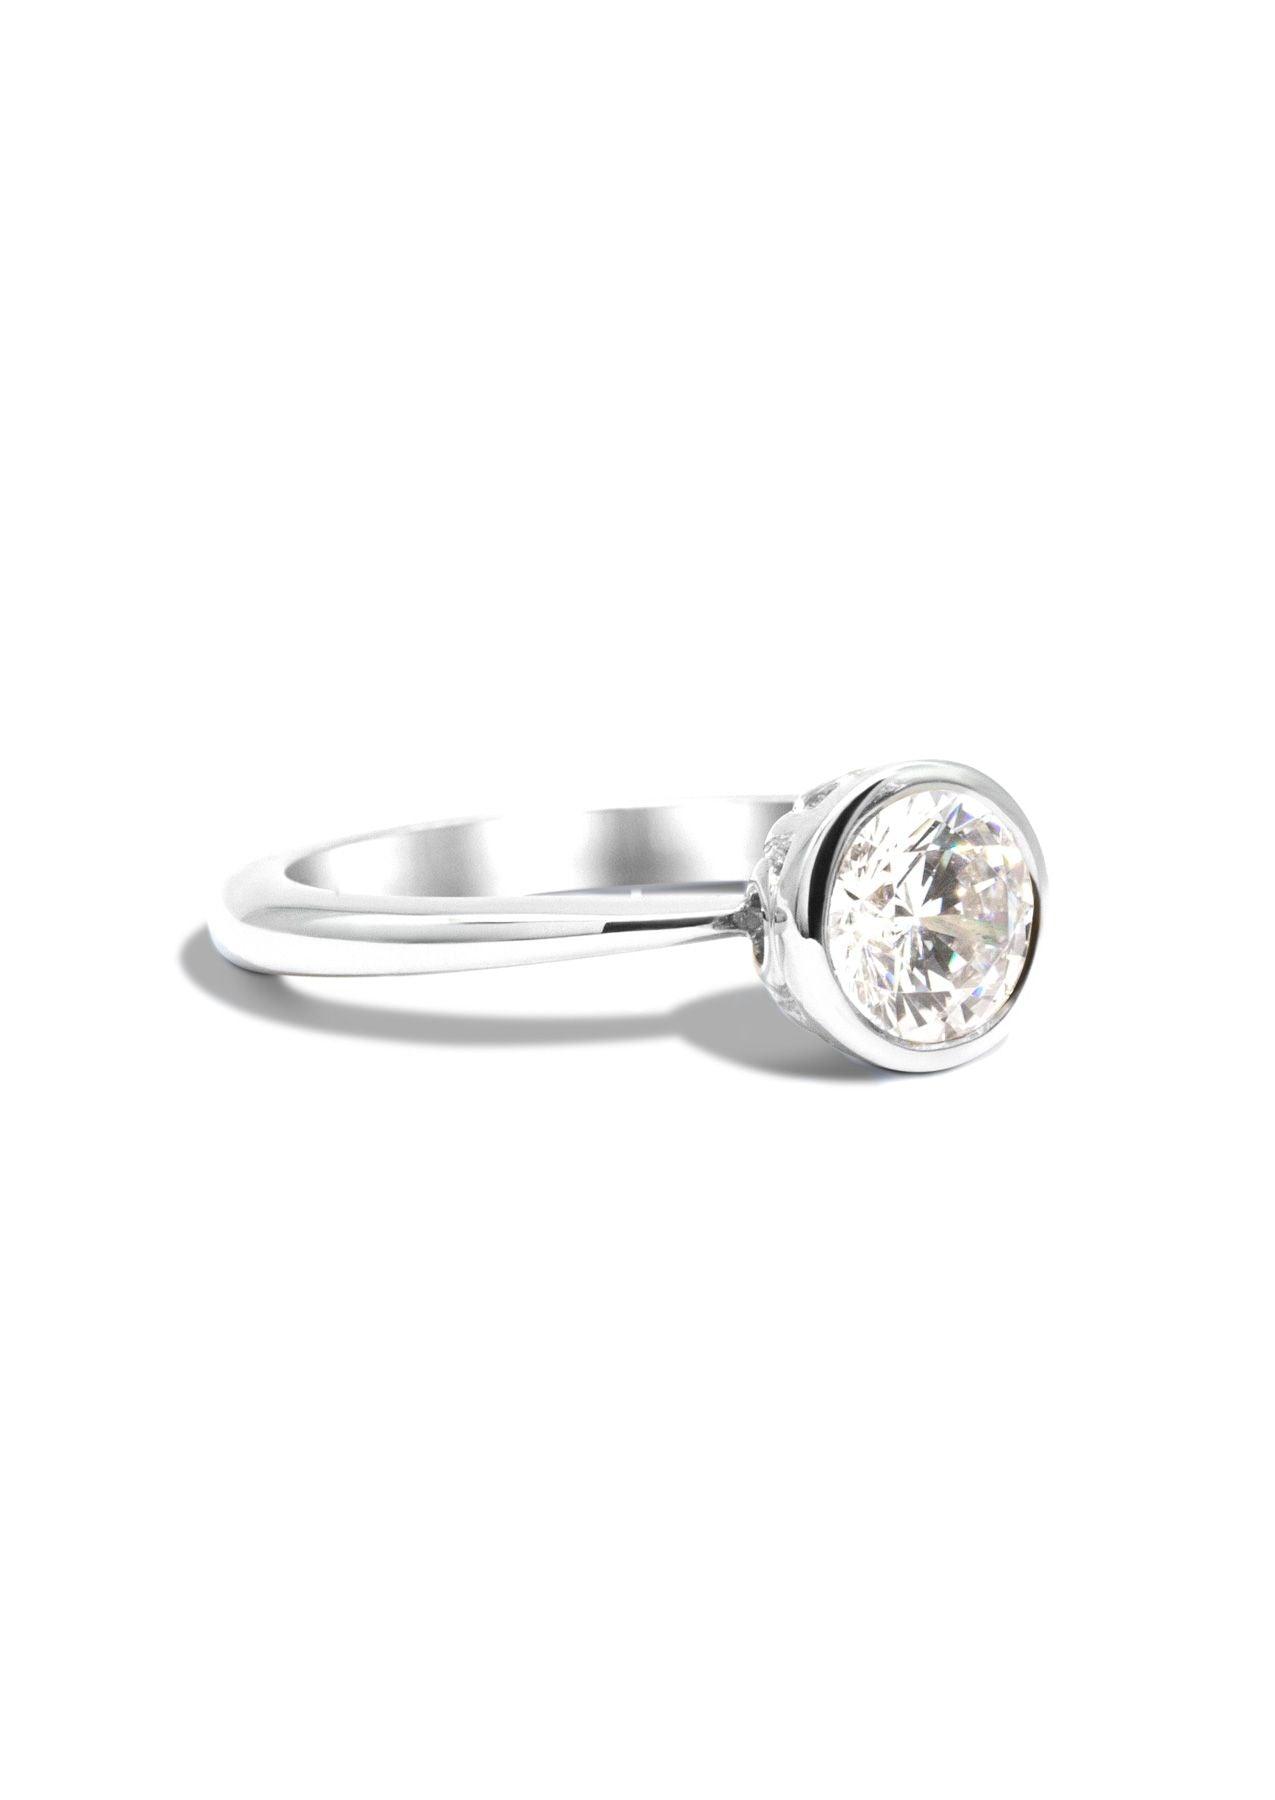 The Isabel White Gold Cultured Diamond Ring